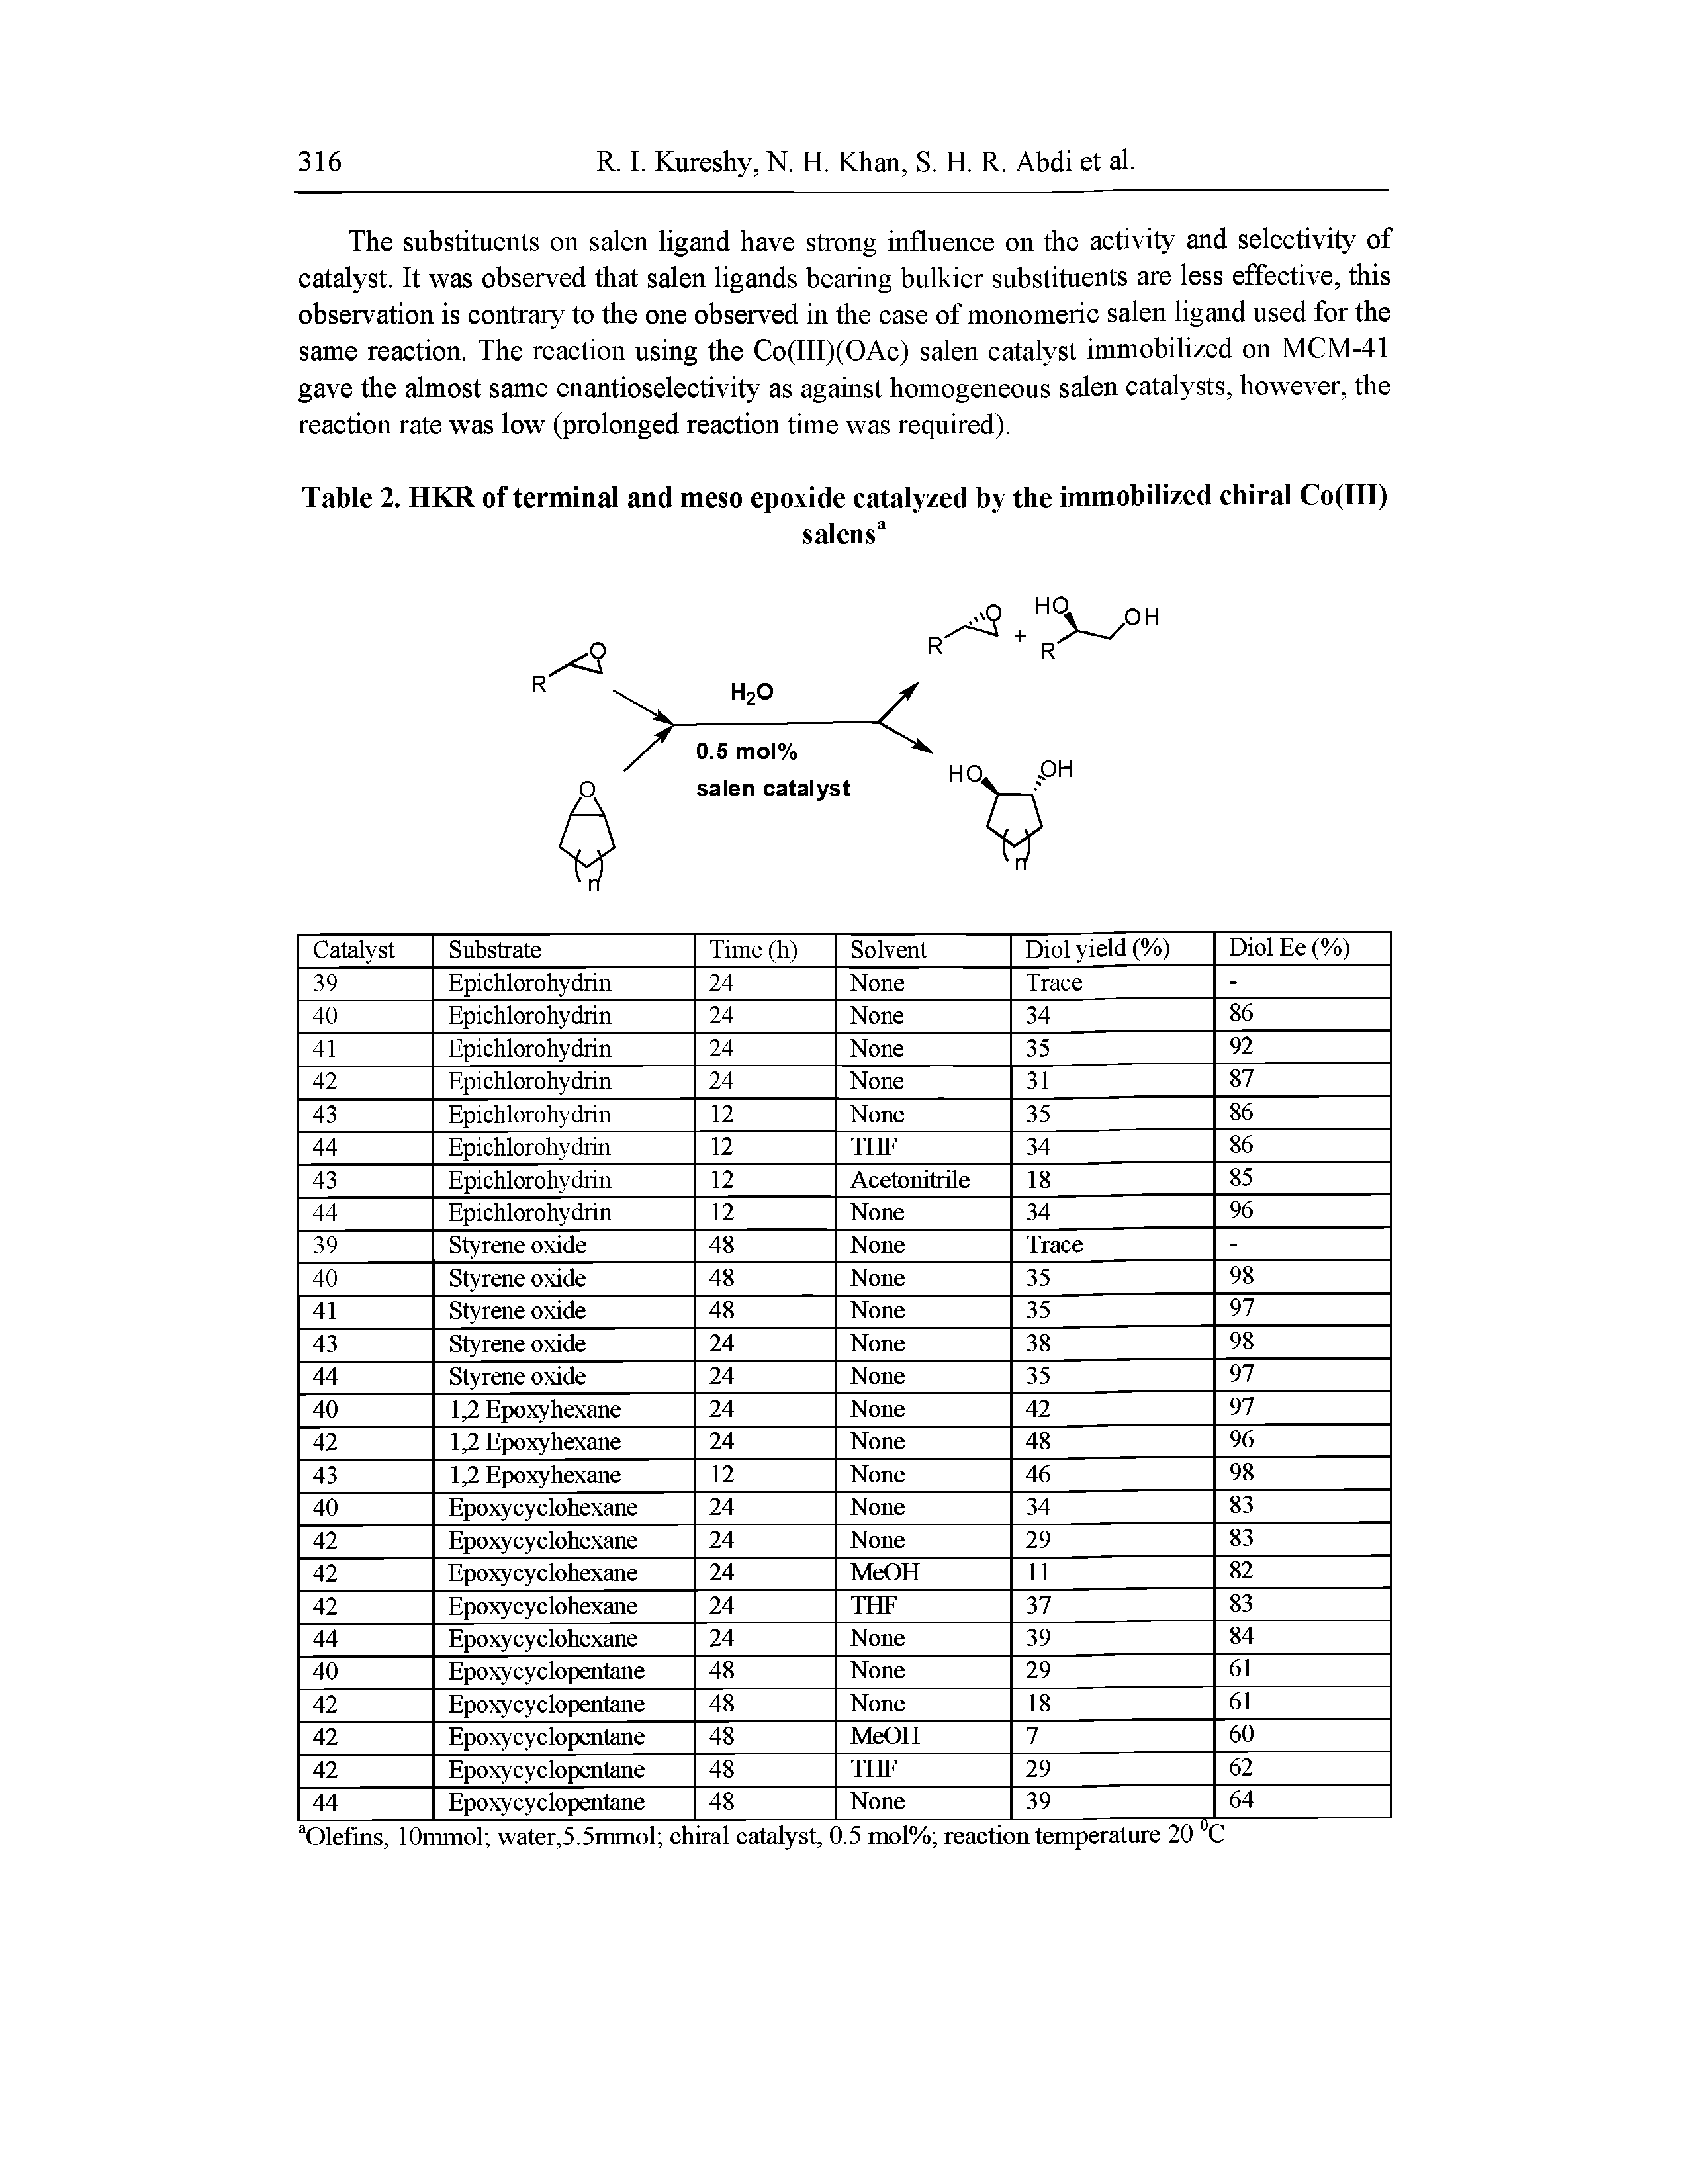 Table 2. HKR of terminal and meso epoxide catalyzed by the immobilized chiral Co(III)...